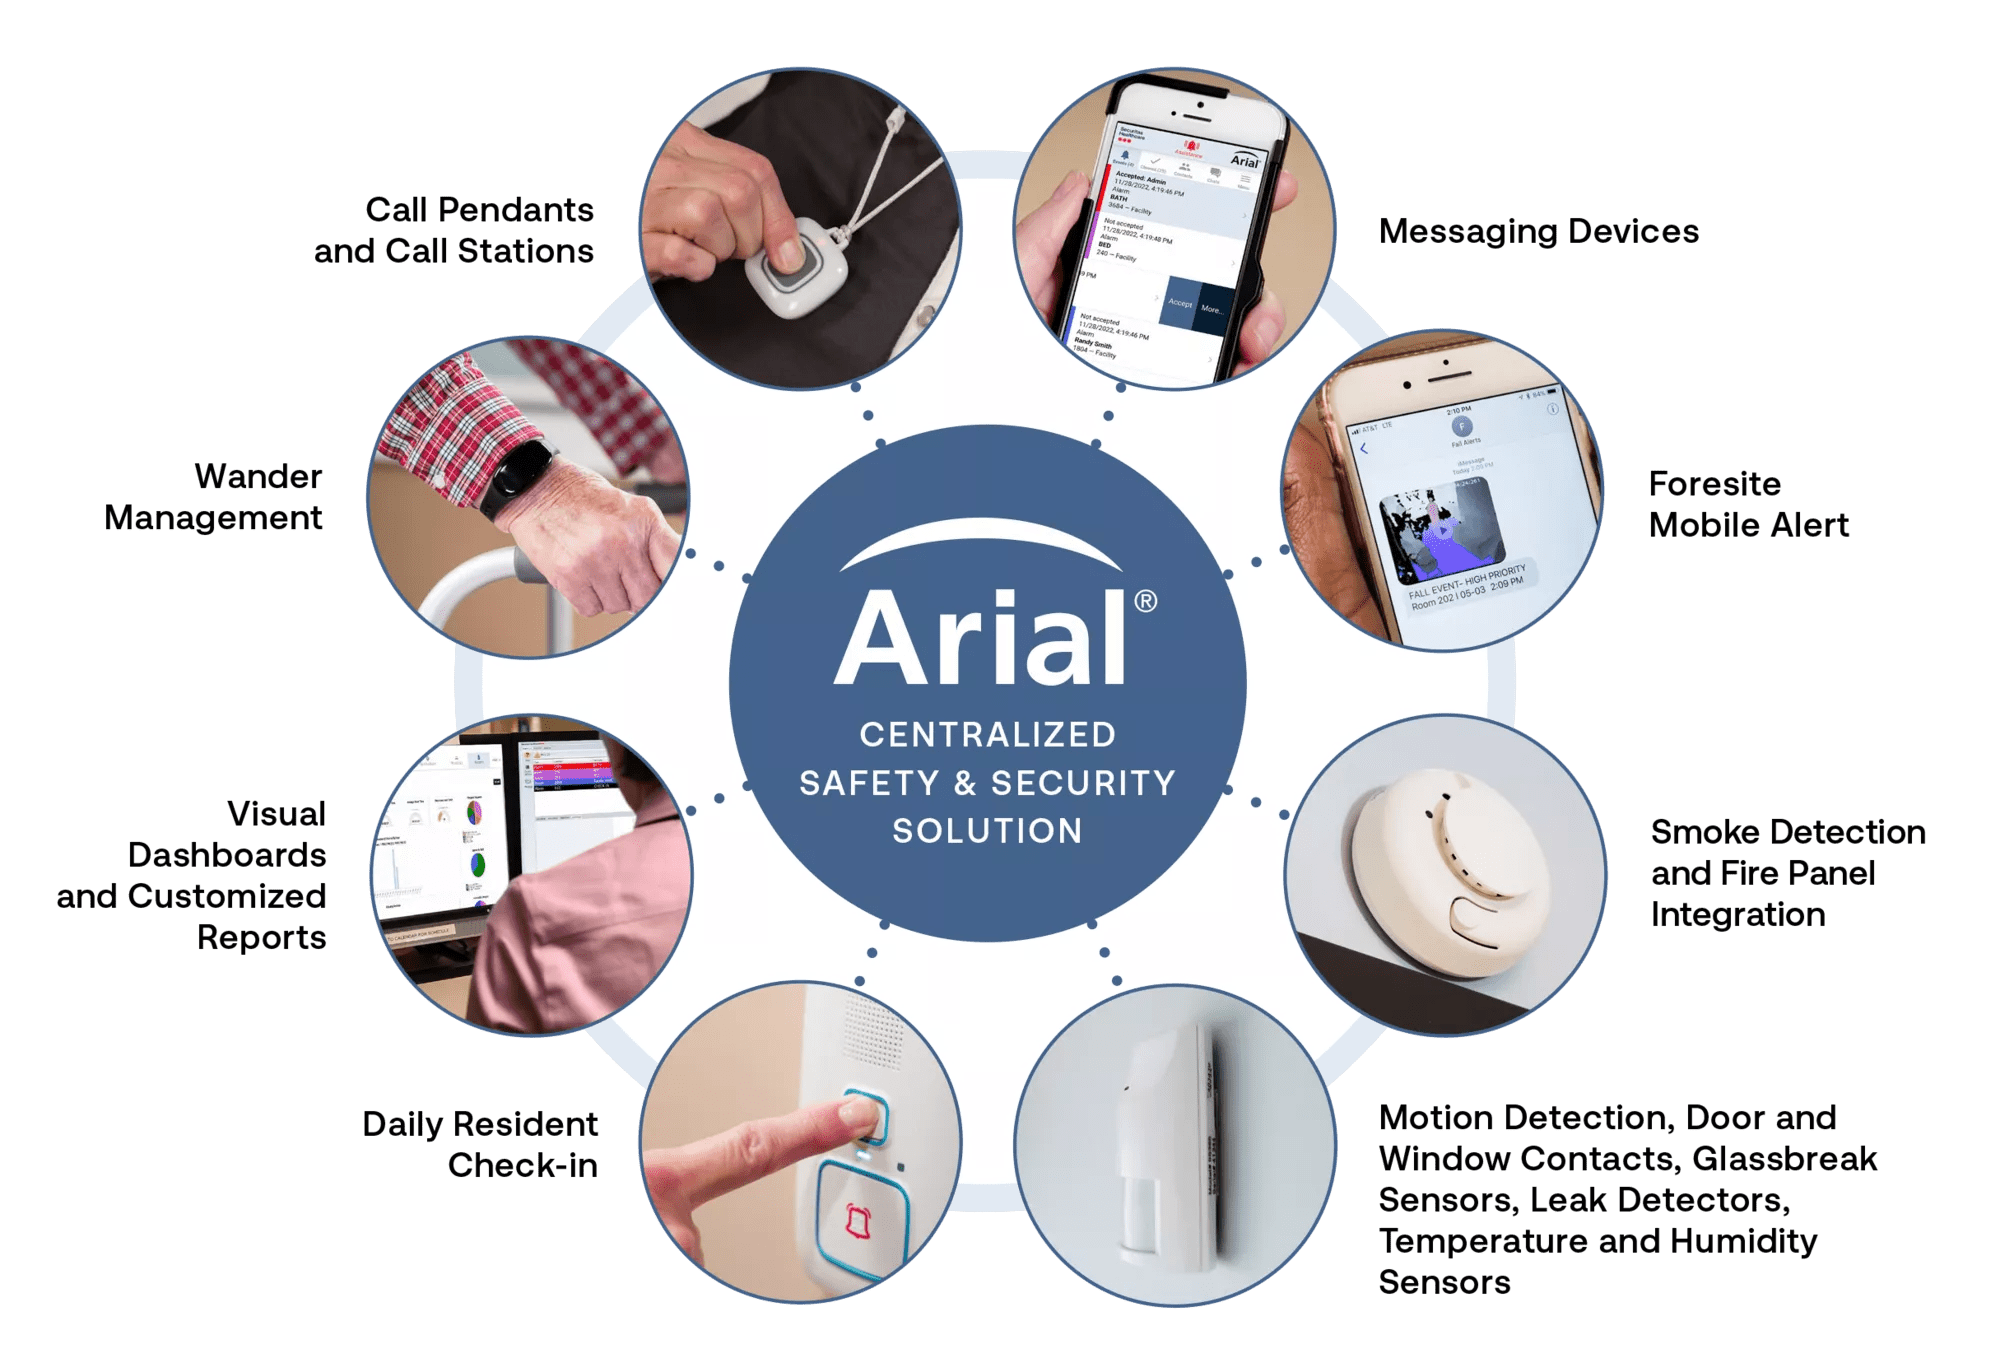 Securitas Healthcare's Arial emergency and nurse call is a centralized safety and security solution